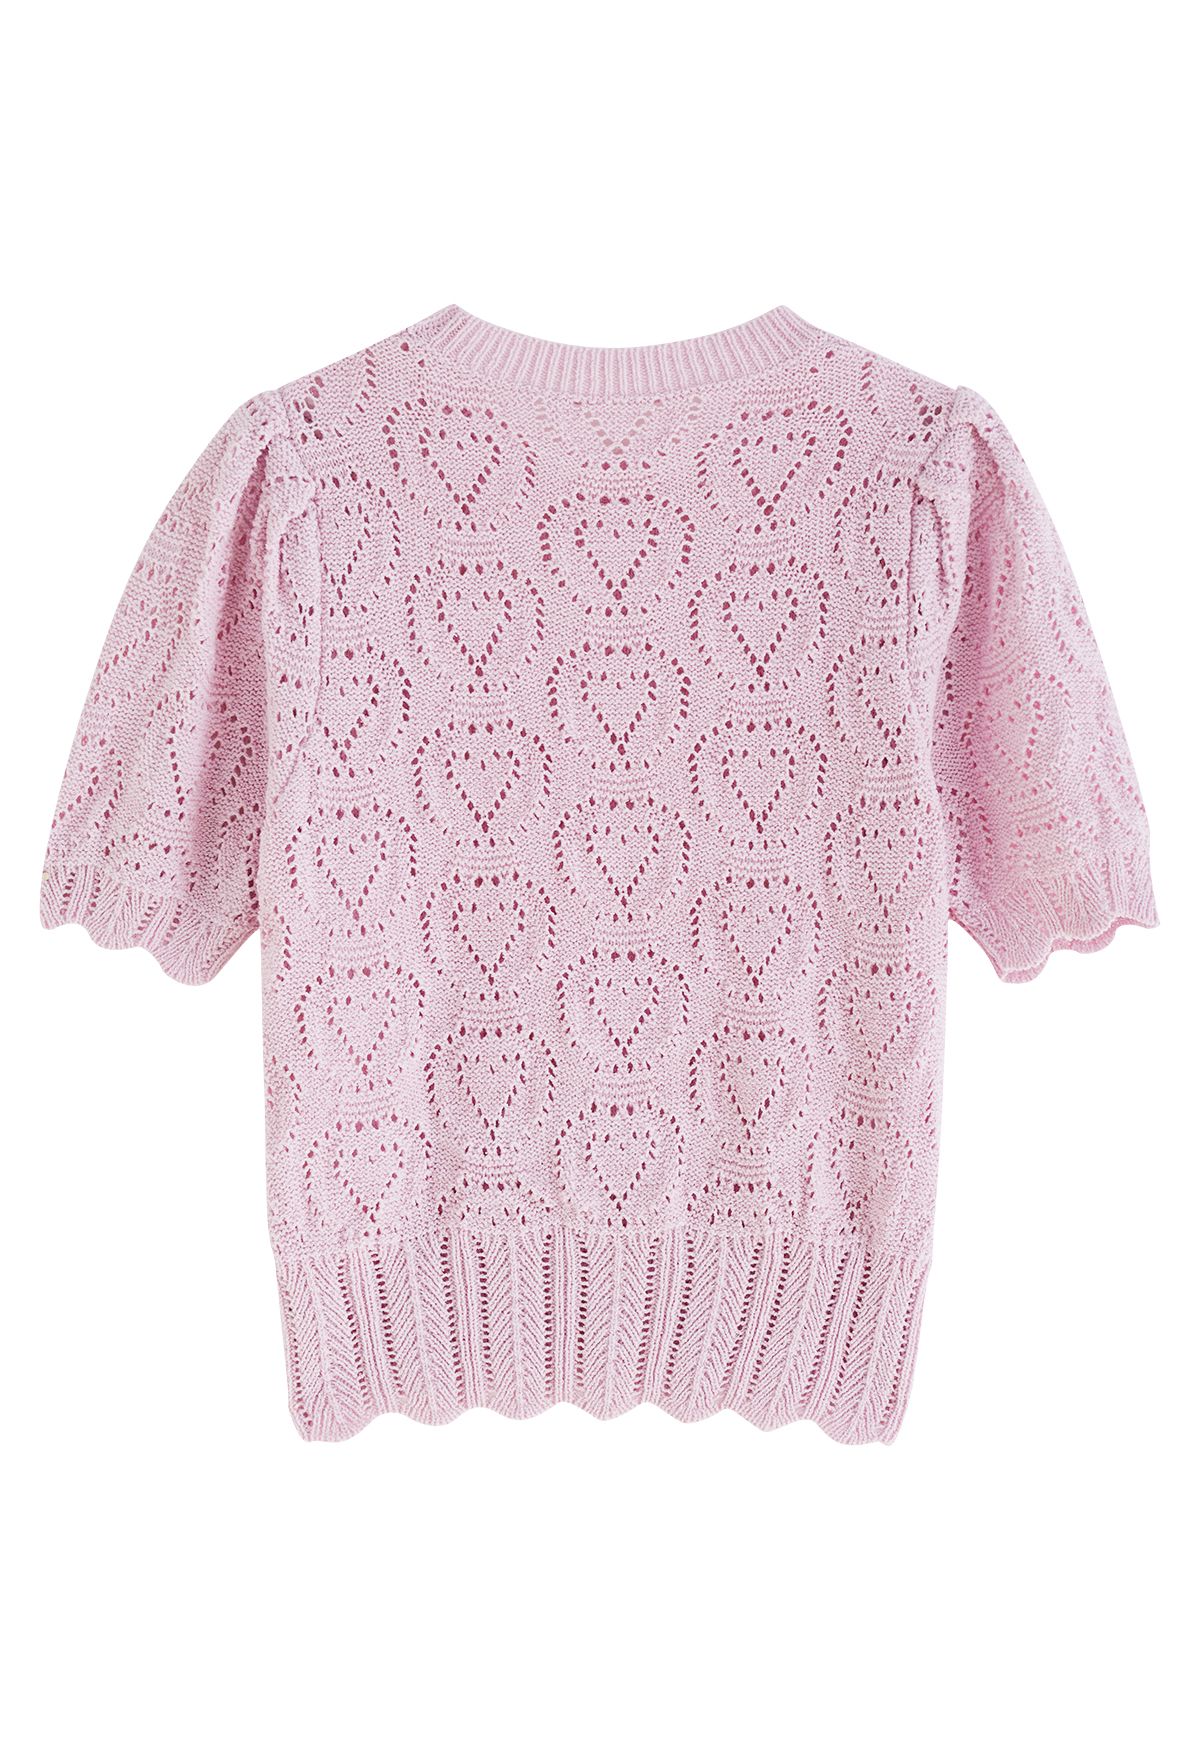 Heart-Shape Pointelle Knit Top in Pink - Retro, Indie and Unique